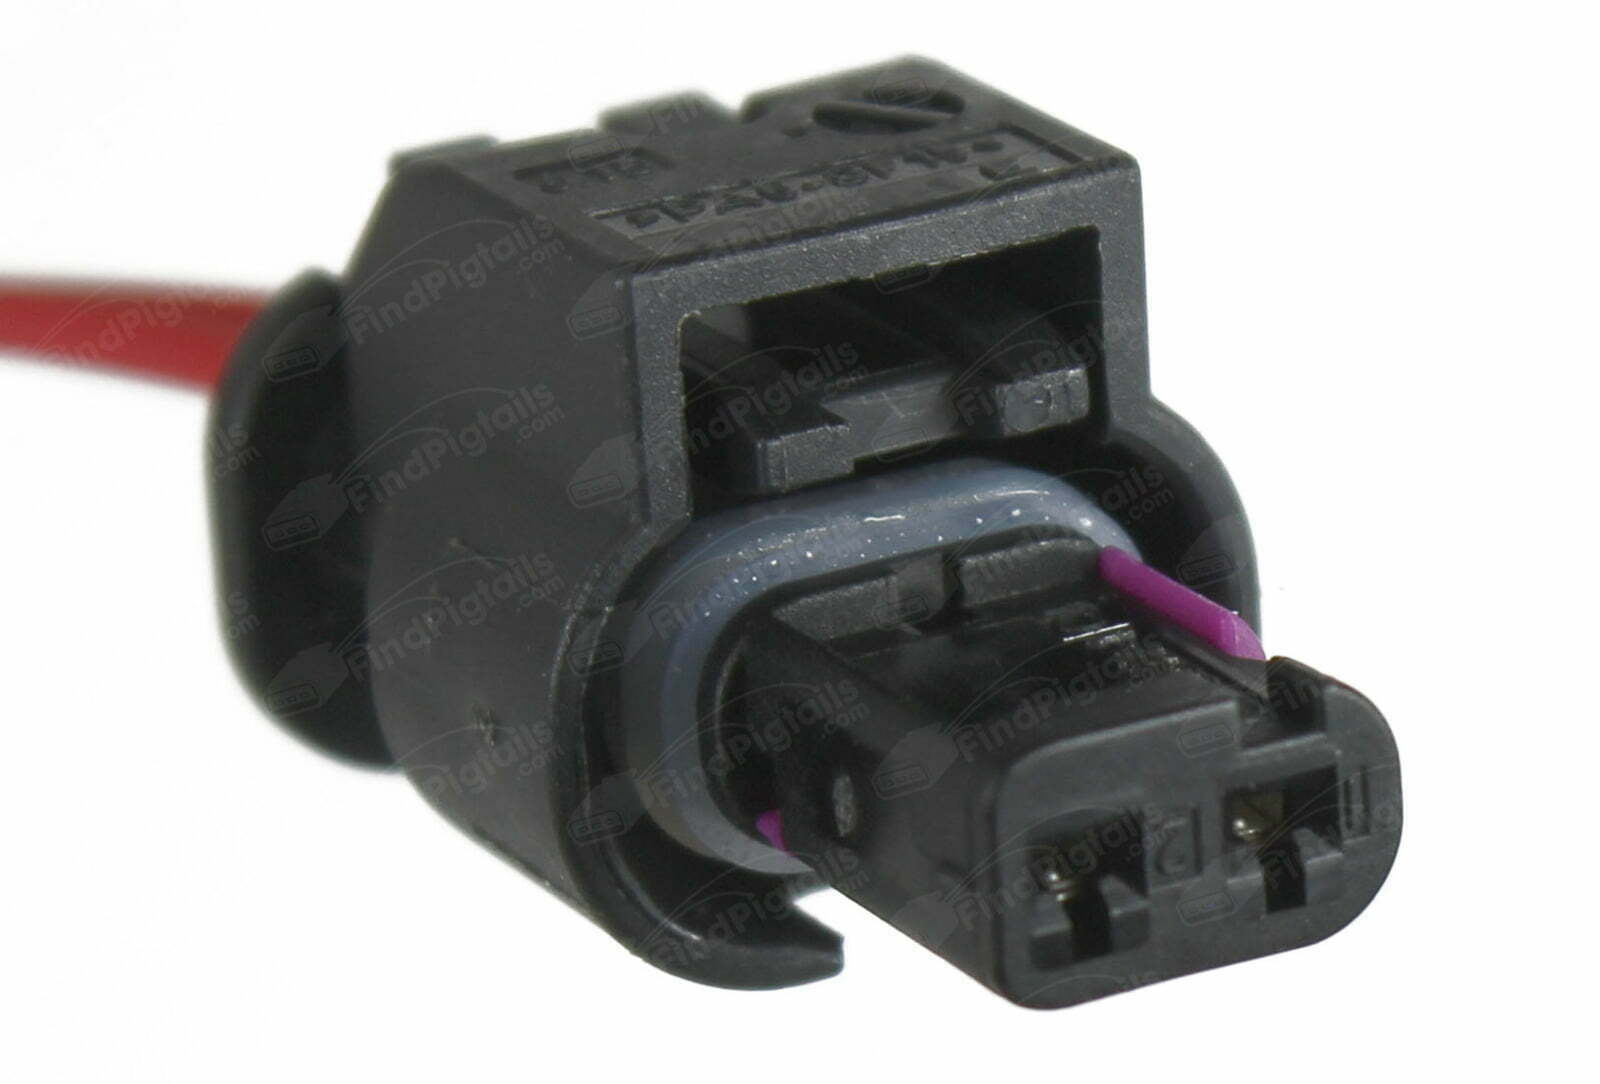 L64A2 is a 2-pin automotive connector which serves at least 146 functions for 50+ vehicles.